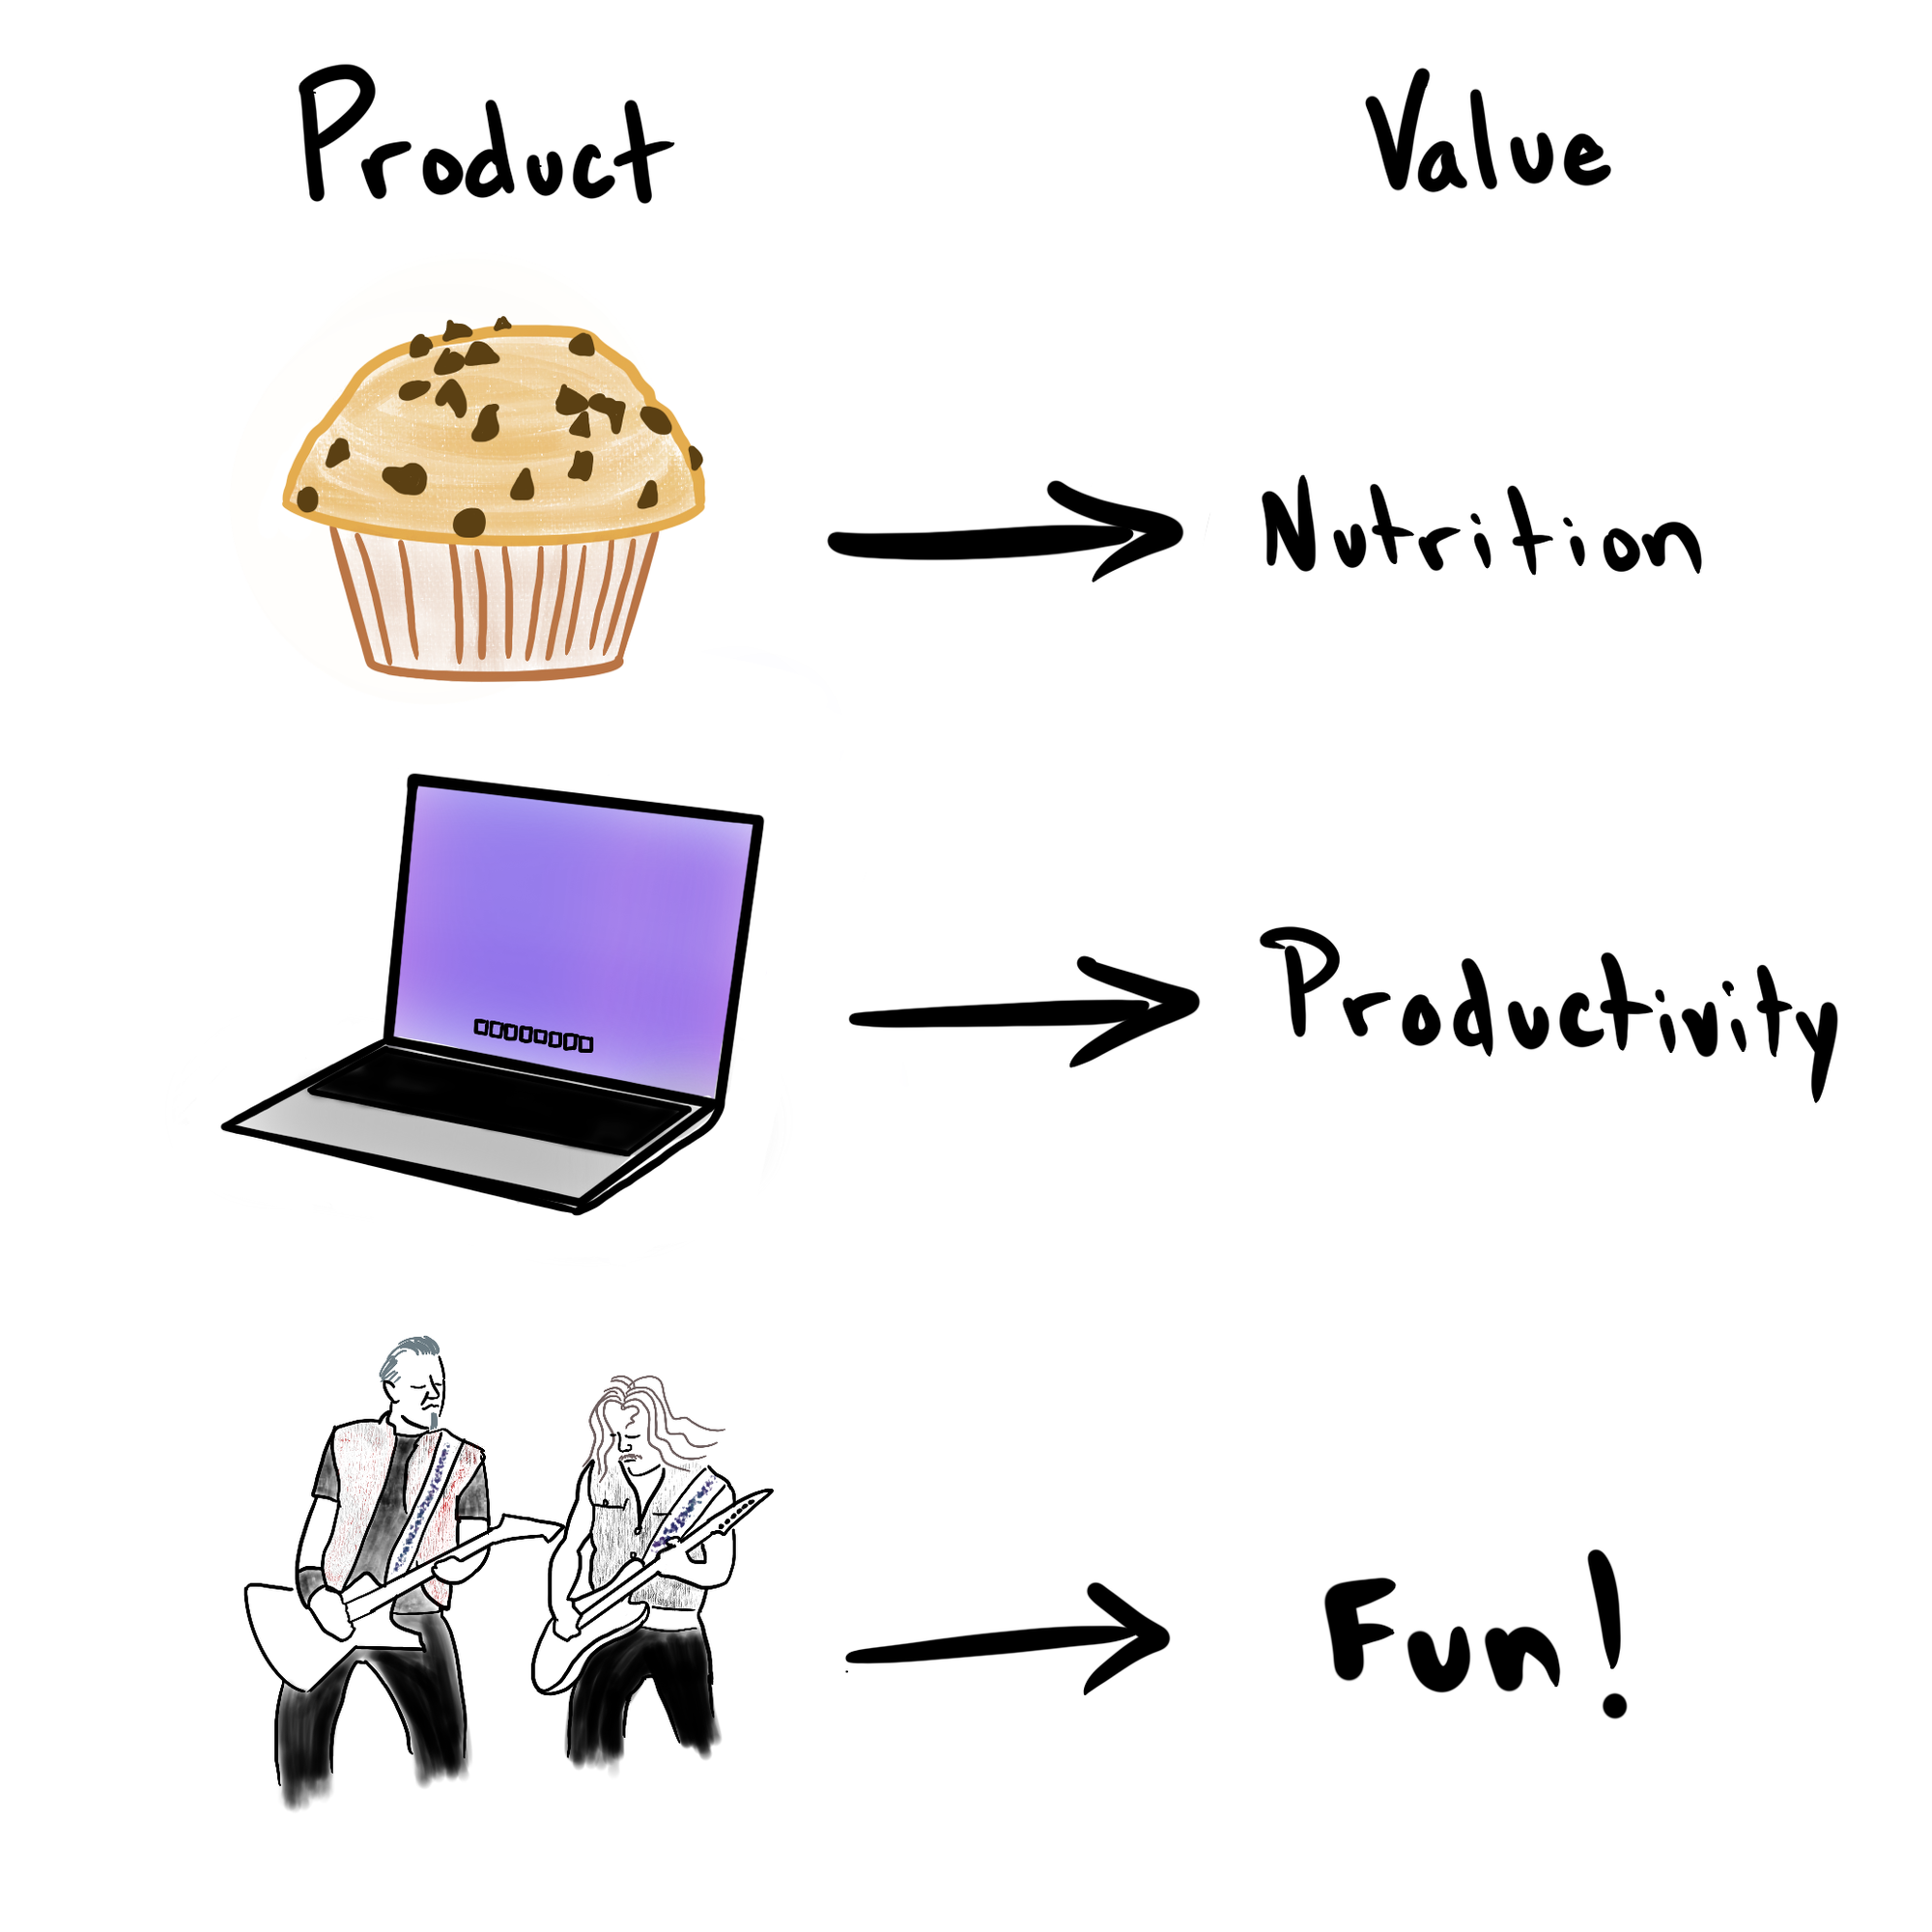 Table with Product on left, Value on right. Three examples: muffin>nutrition, laptop>productivity, concert>fun!